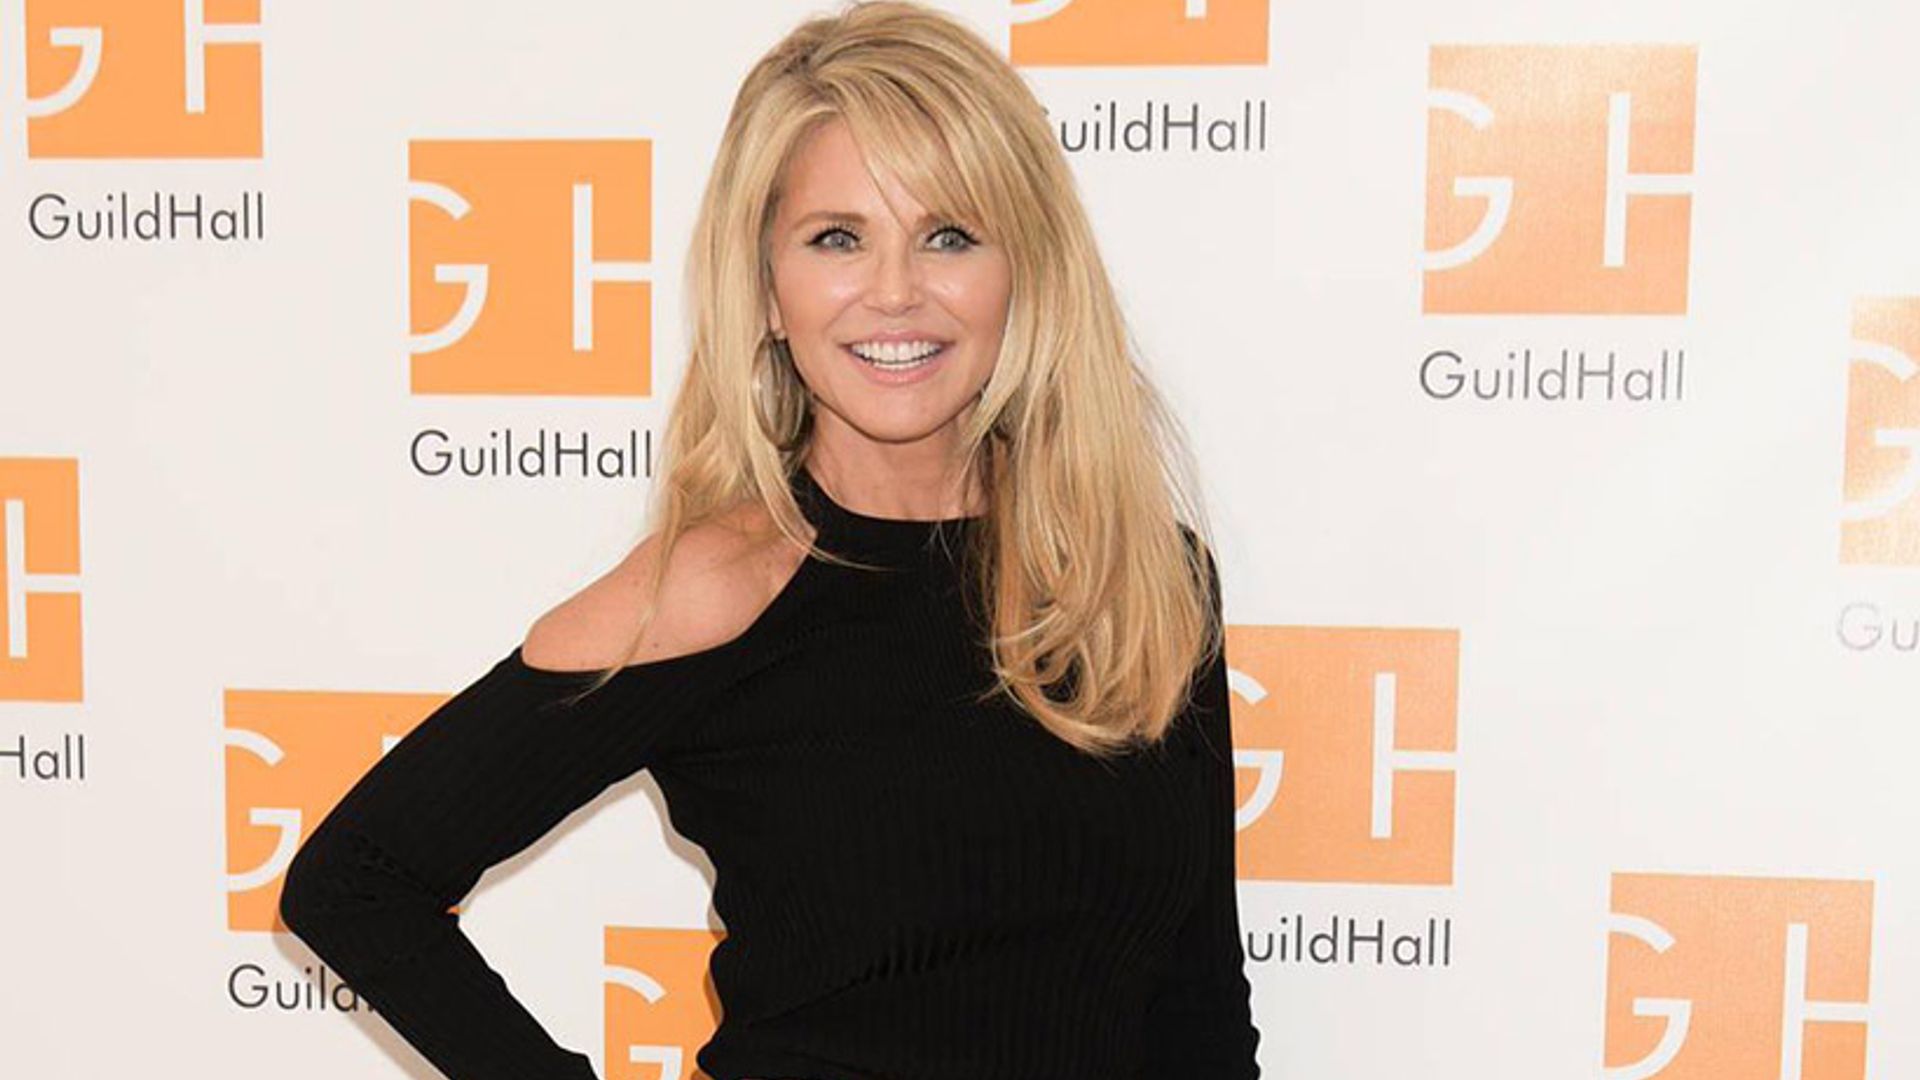 The two anti-ageing procedures Christie Brinkley, 63, swears by